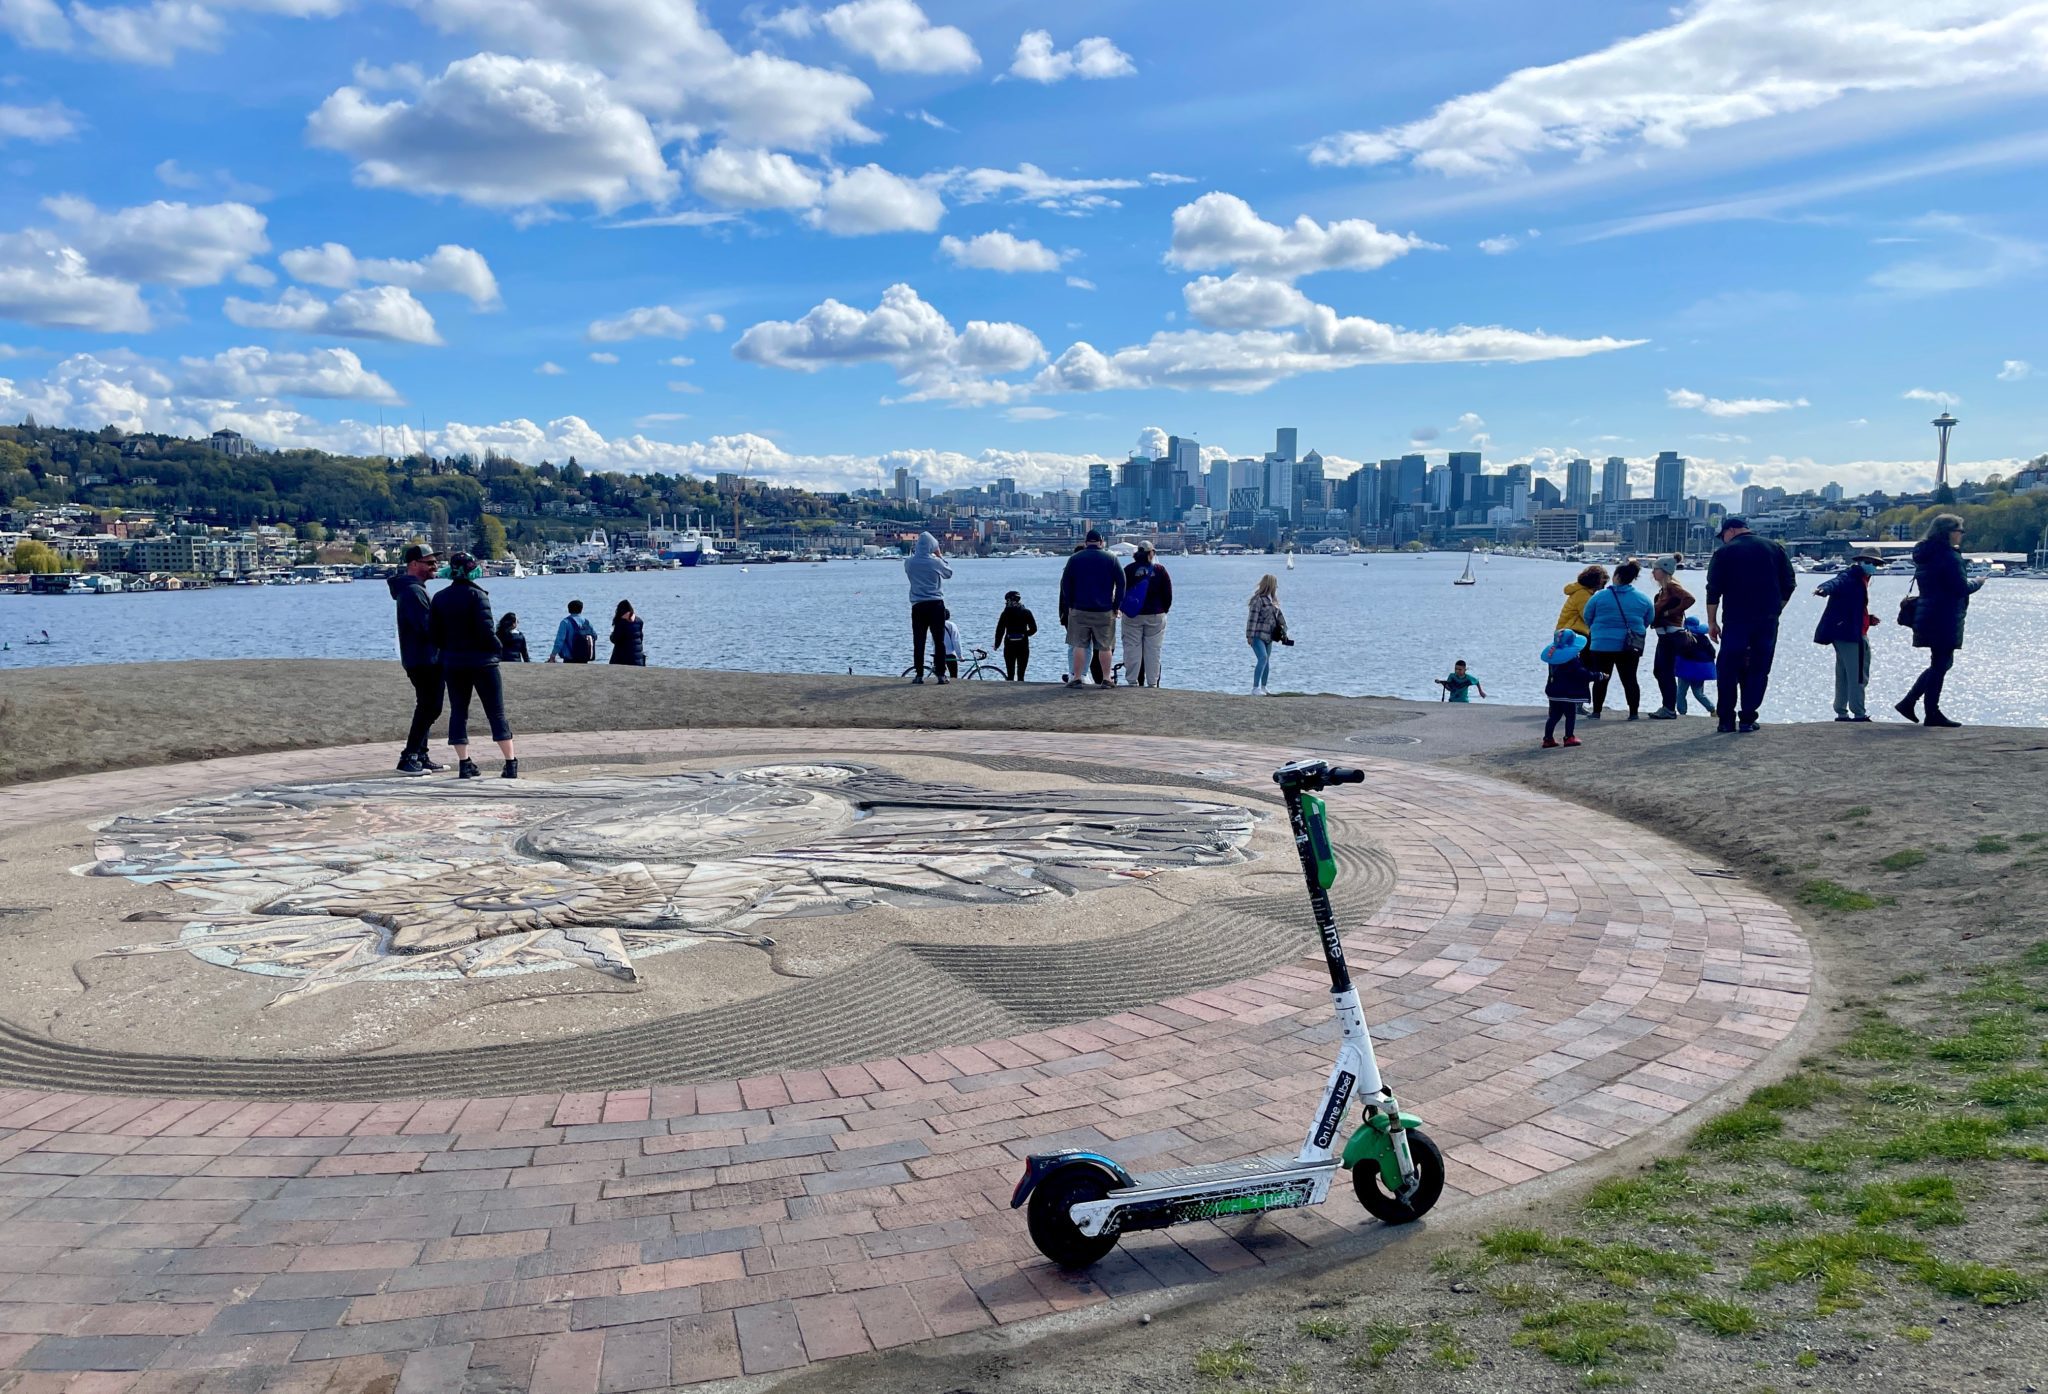 A Lime scooter in Gas Works Park.